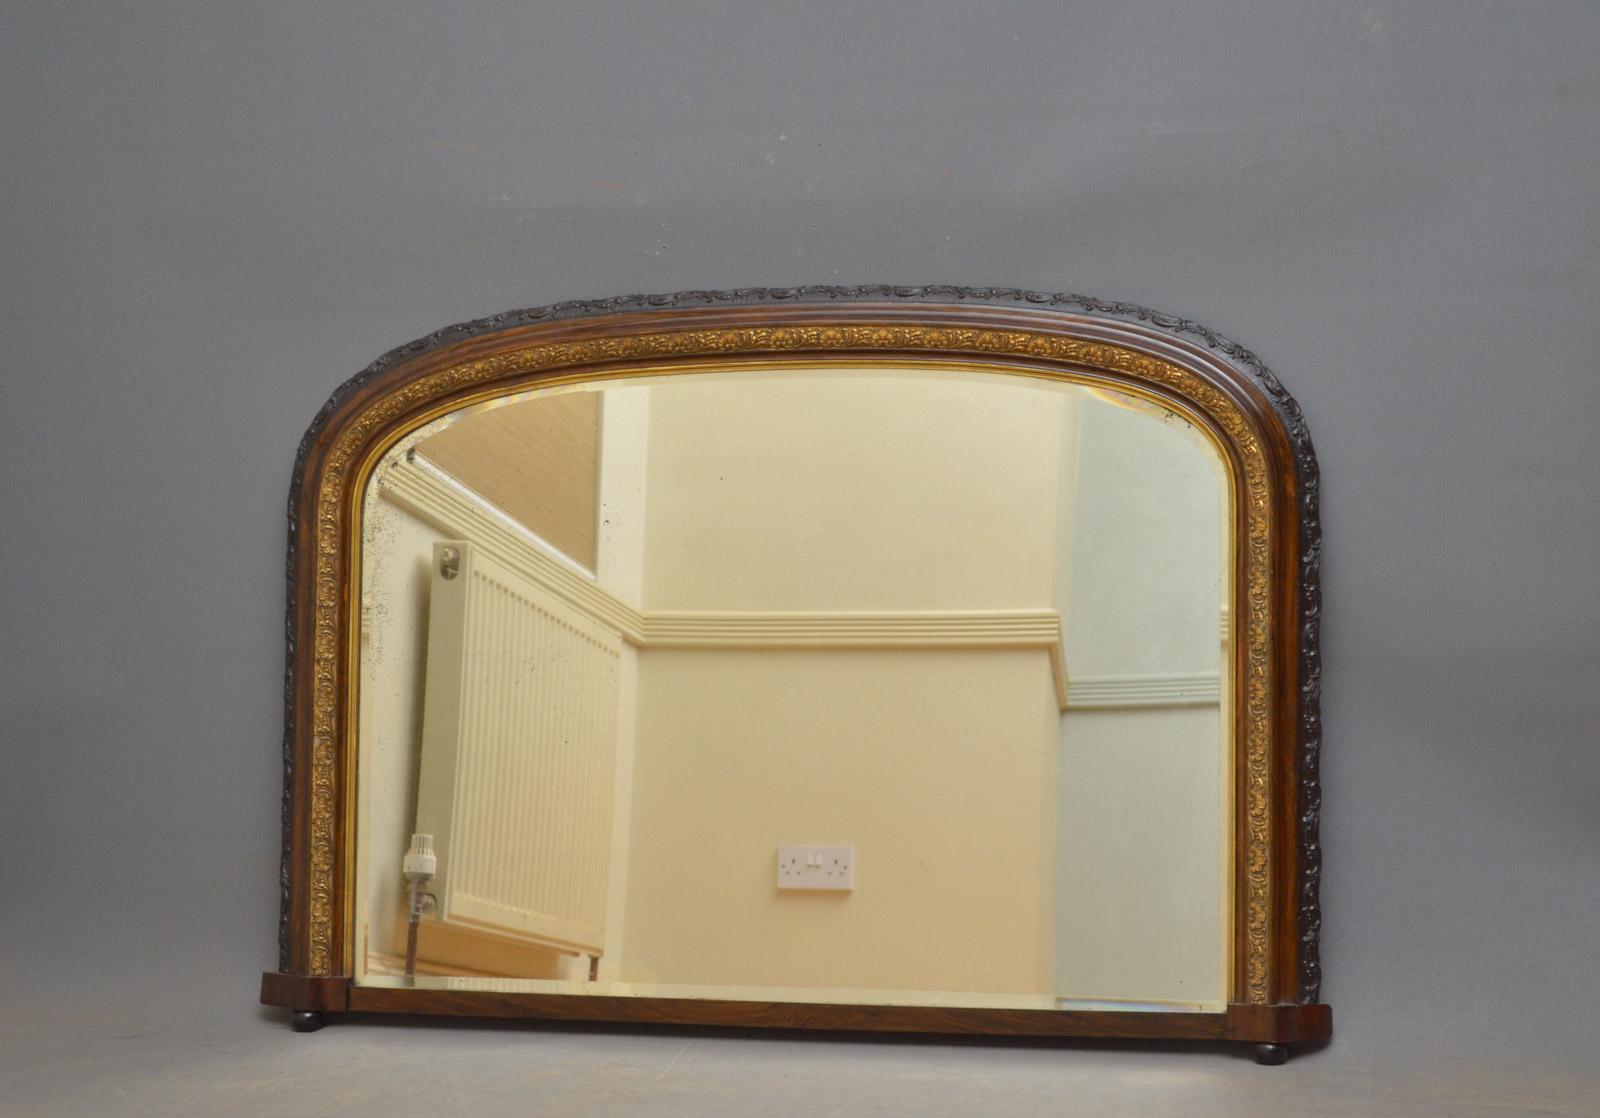 J00 attractive Victorian arched overmantel mirror with original bevelled edge glass (with some foxing) in gilded and ebonized frame, all in wonderful home ready condition, circa 1880
Measures: H 30.5